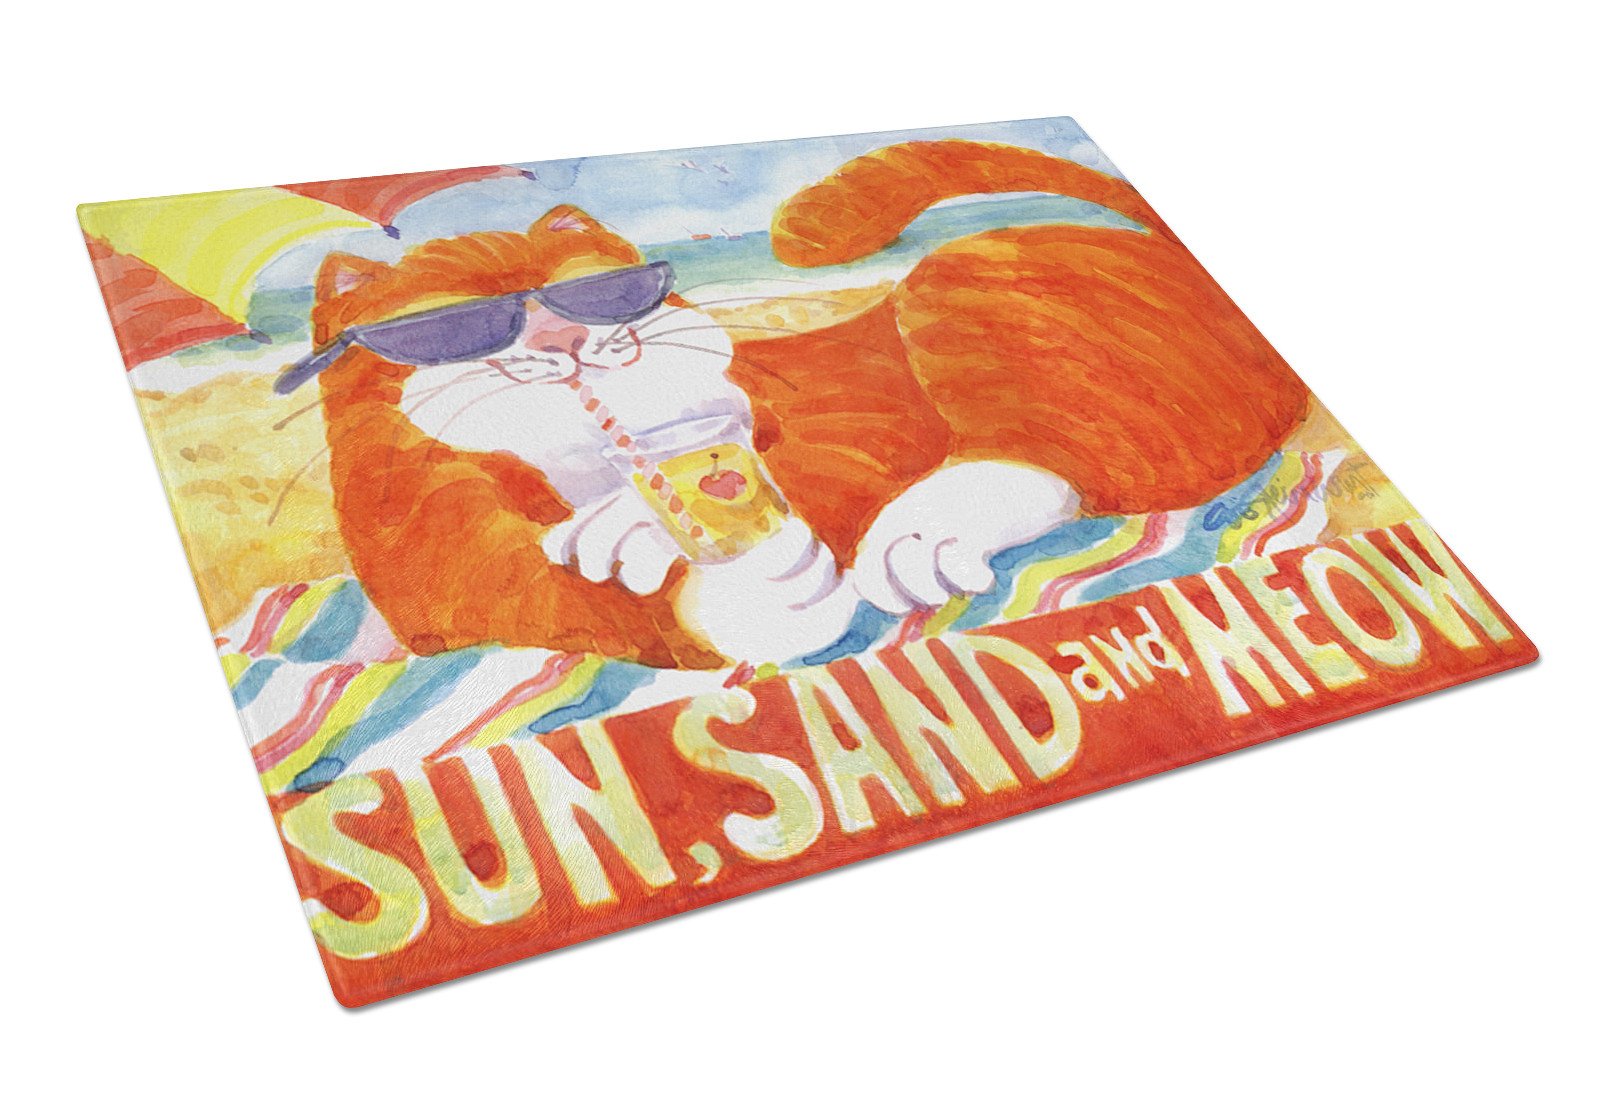 Orange Tabby at the beach Glass Cutting Board Large by Caroline's Treasures